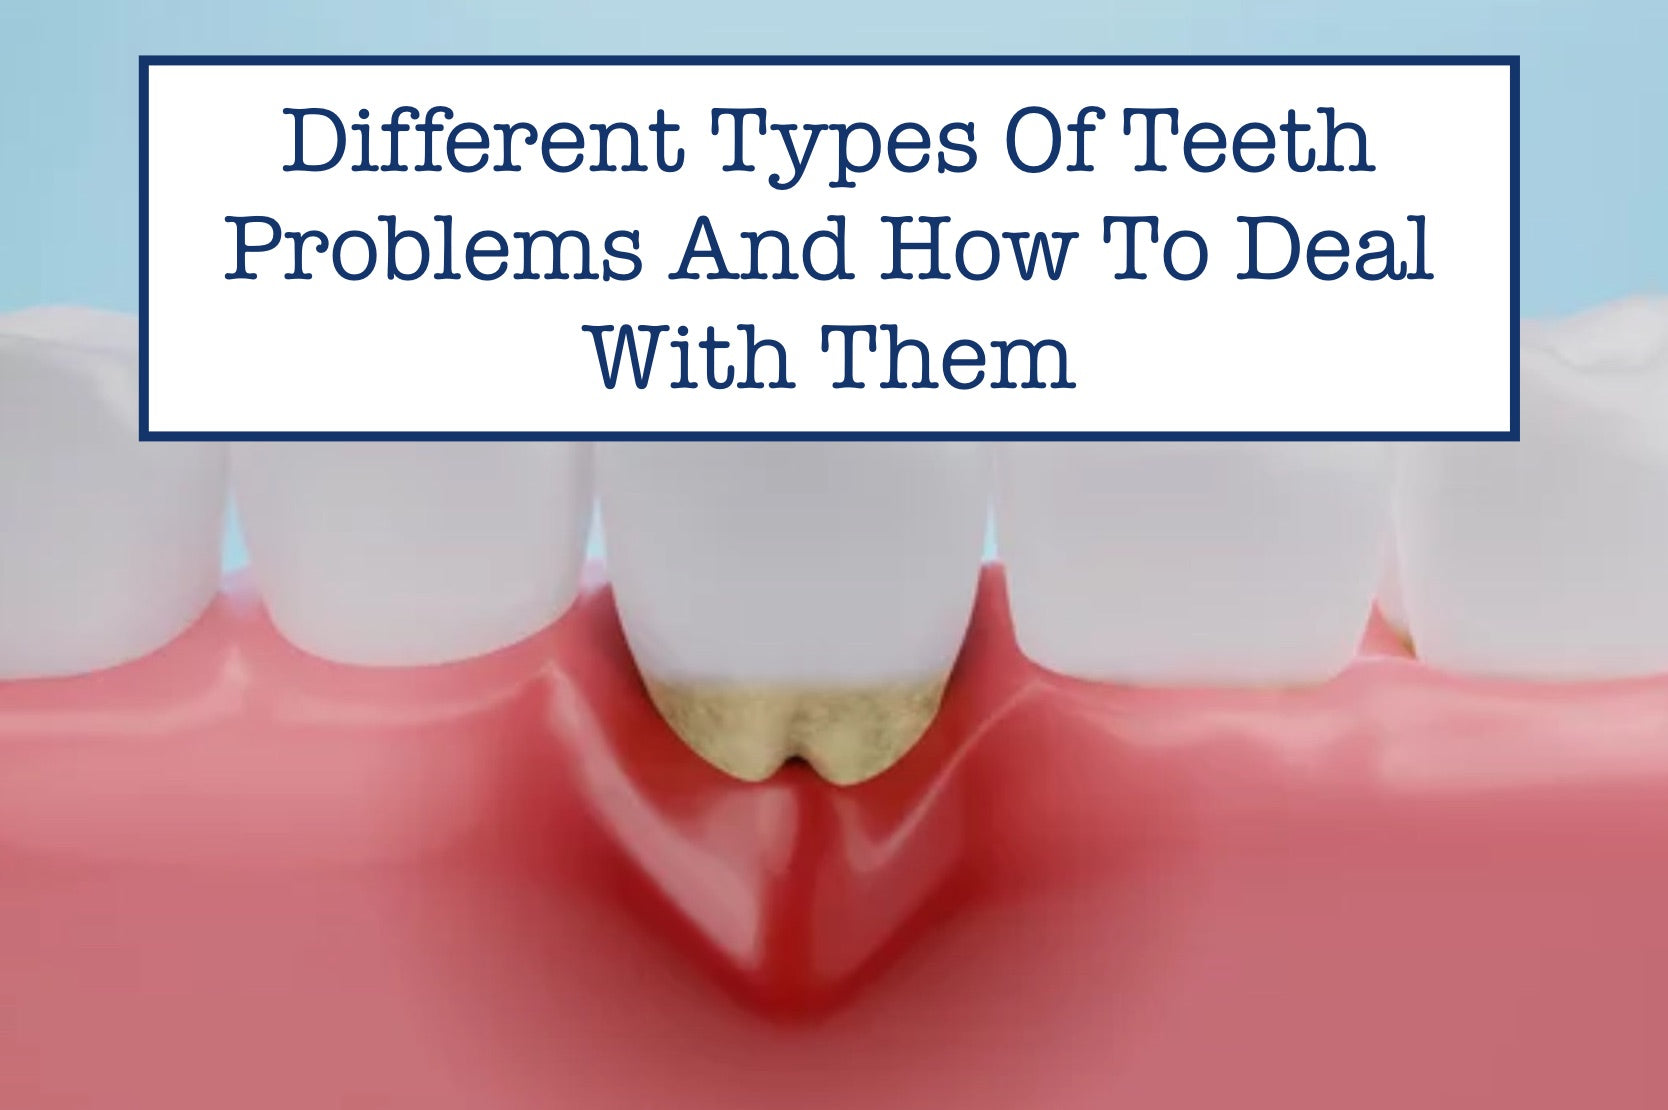 Different Types Of Teeth Problems And How To Deal With Them